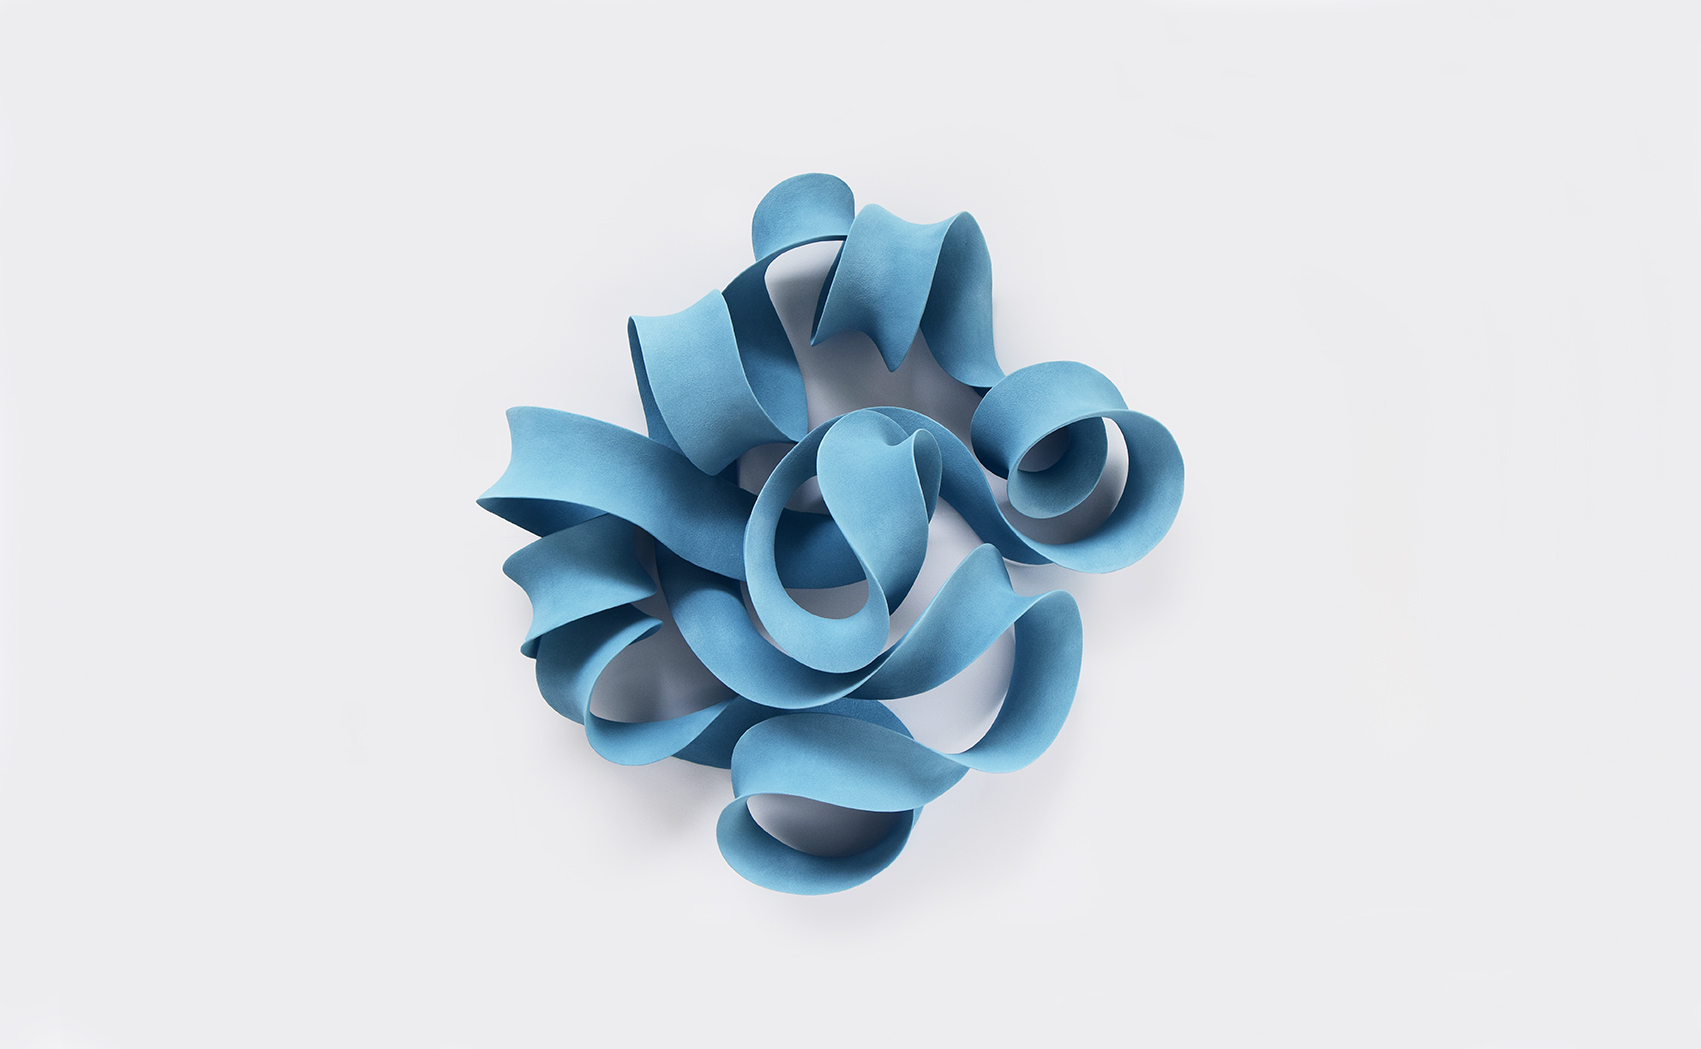 Sinuous Blue, wall mounted ceramic sculpture, 85 x 87 x 34 cm